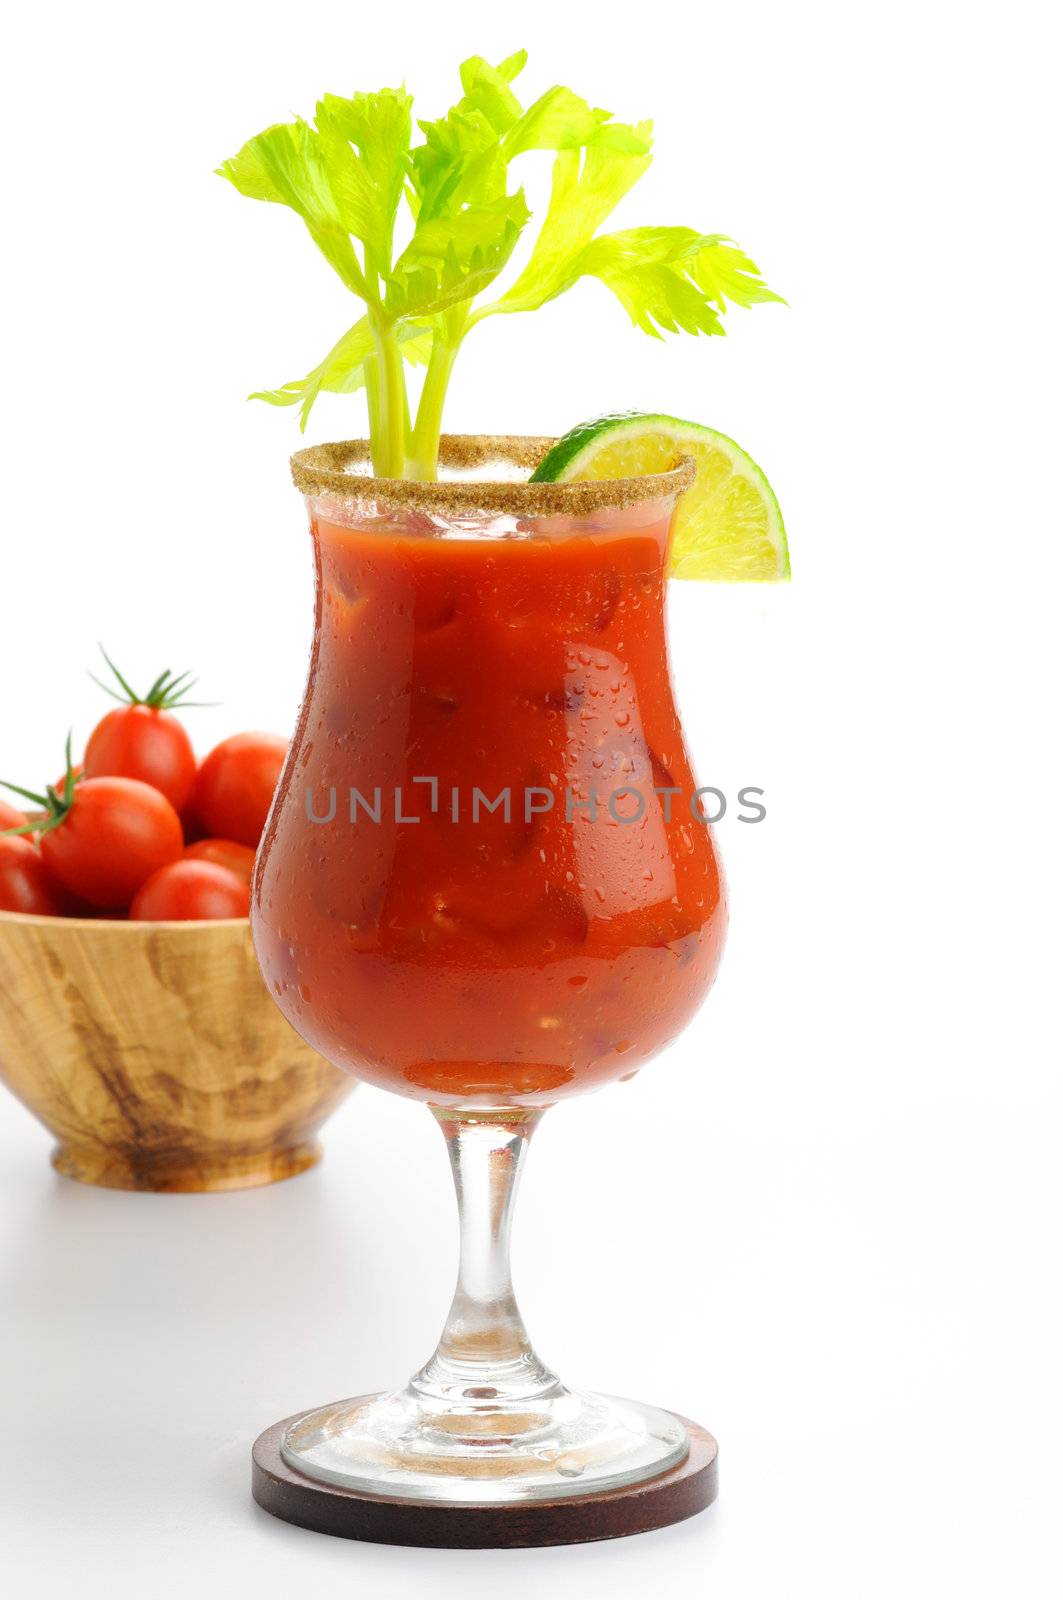 Tomato Cocktail by billberryphotography